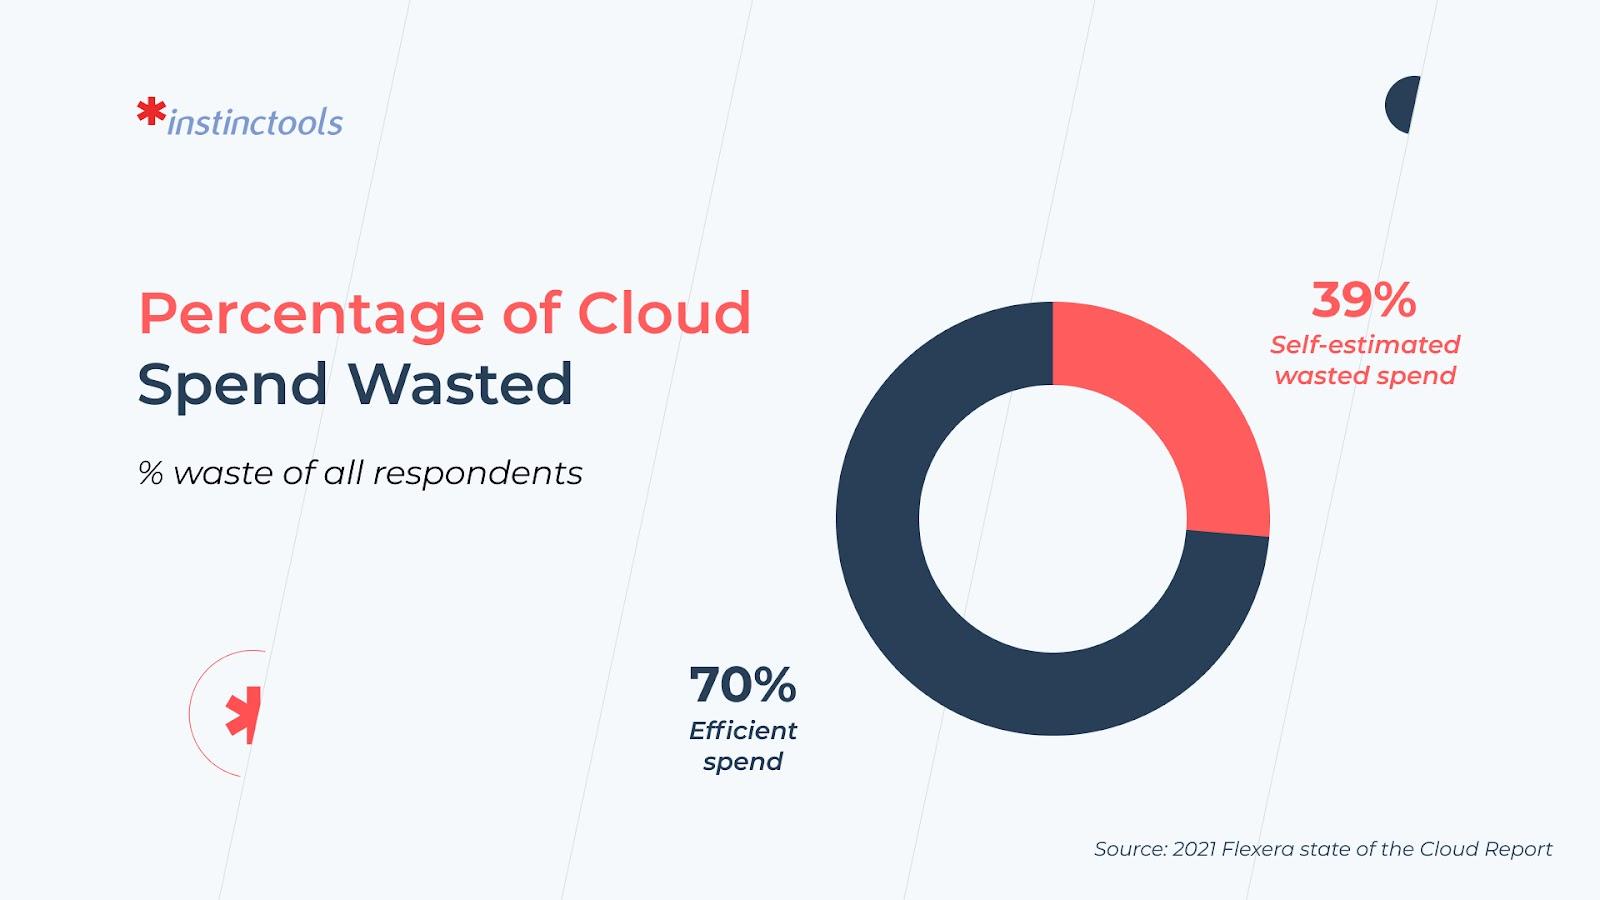 Percentage of Cloud Spend Wasted